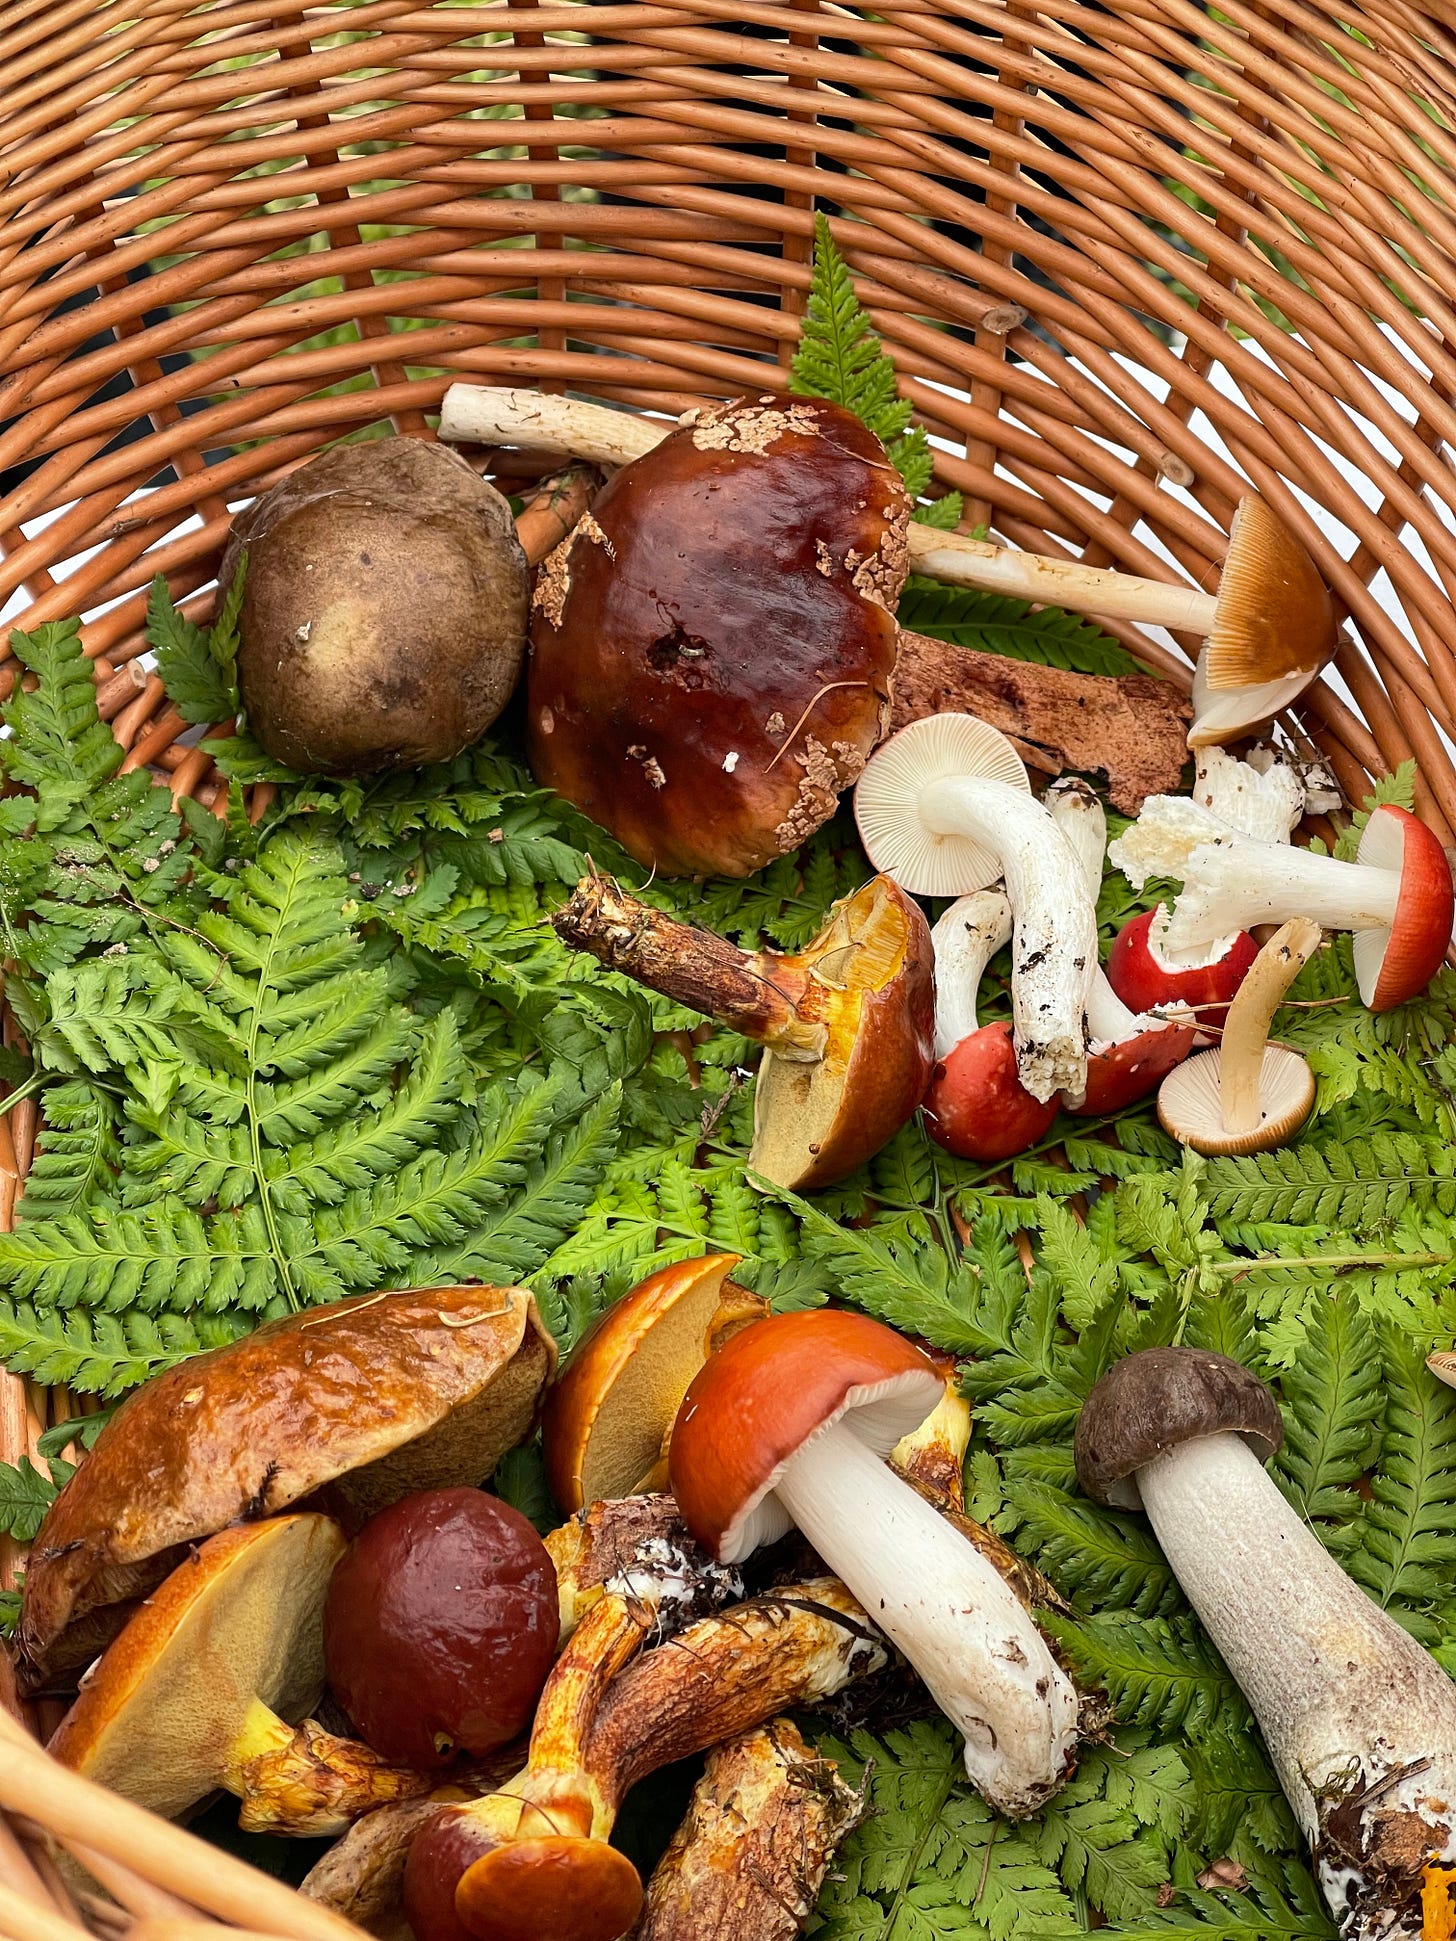 A foraging basket full of a variety of fungi